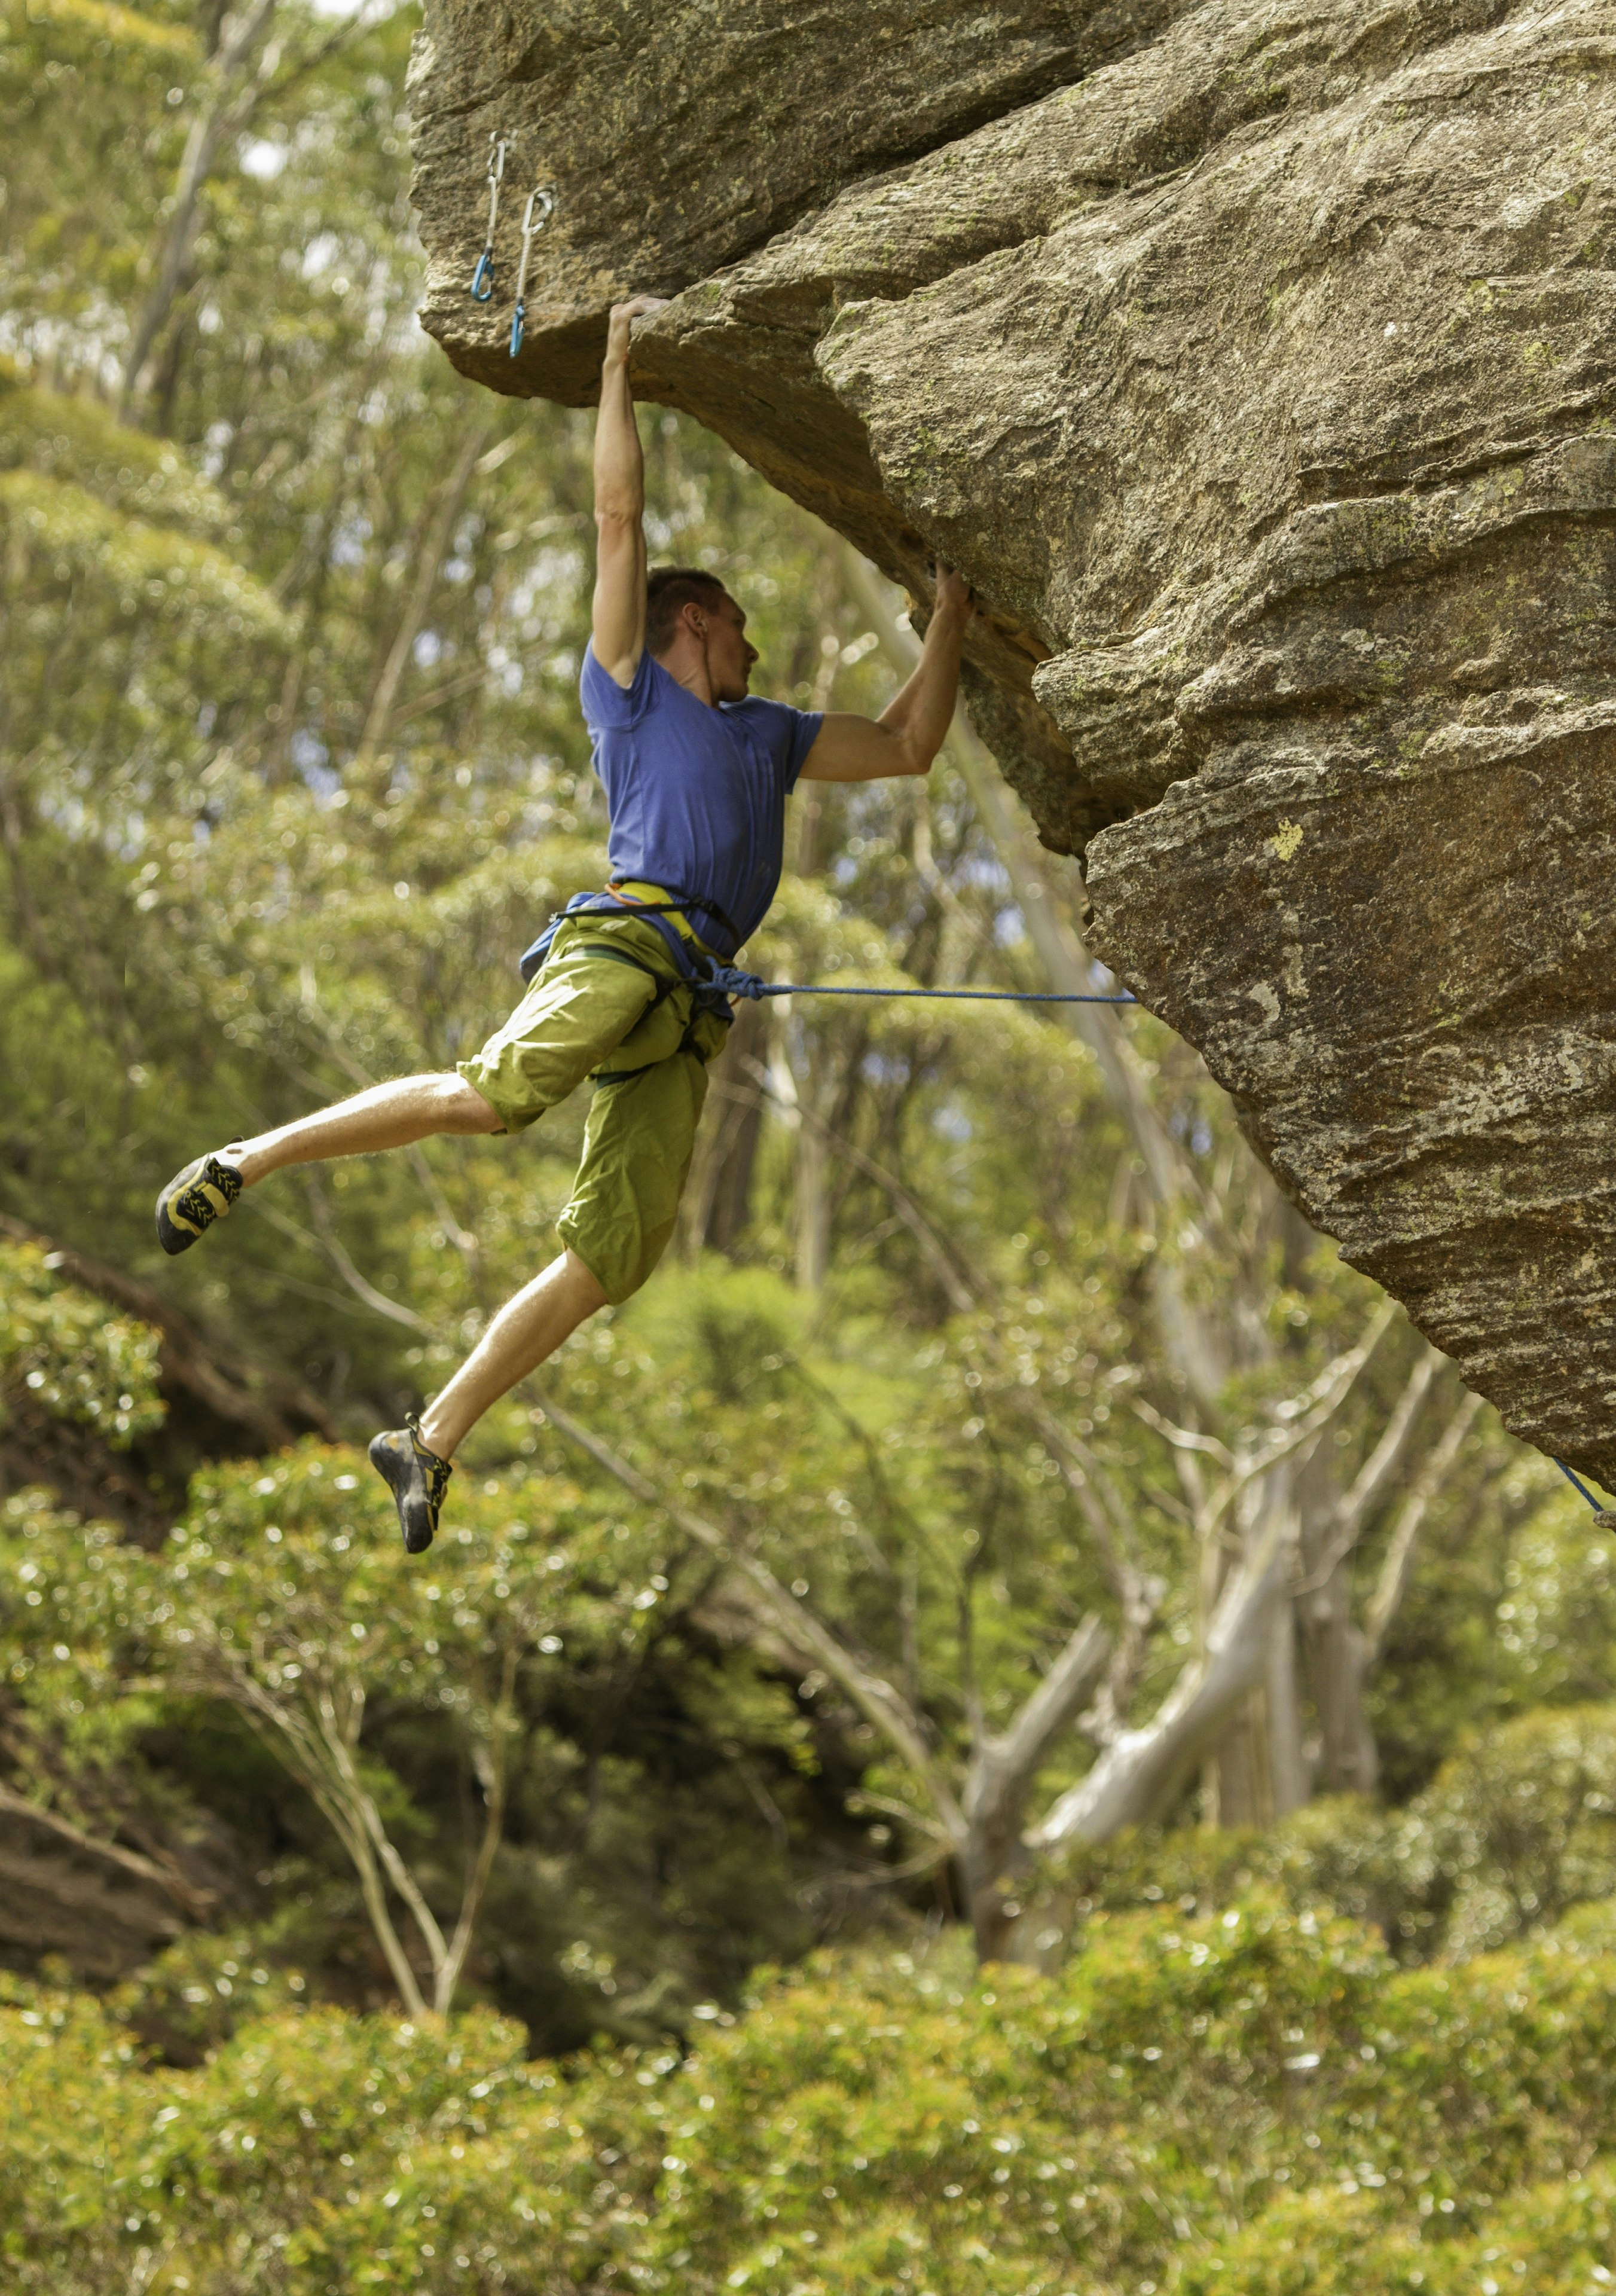 A rock climber hangs from his hands below a rock overhang; a rope from his harness leads to the rock. Behind is a lush forest setting.